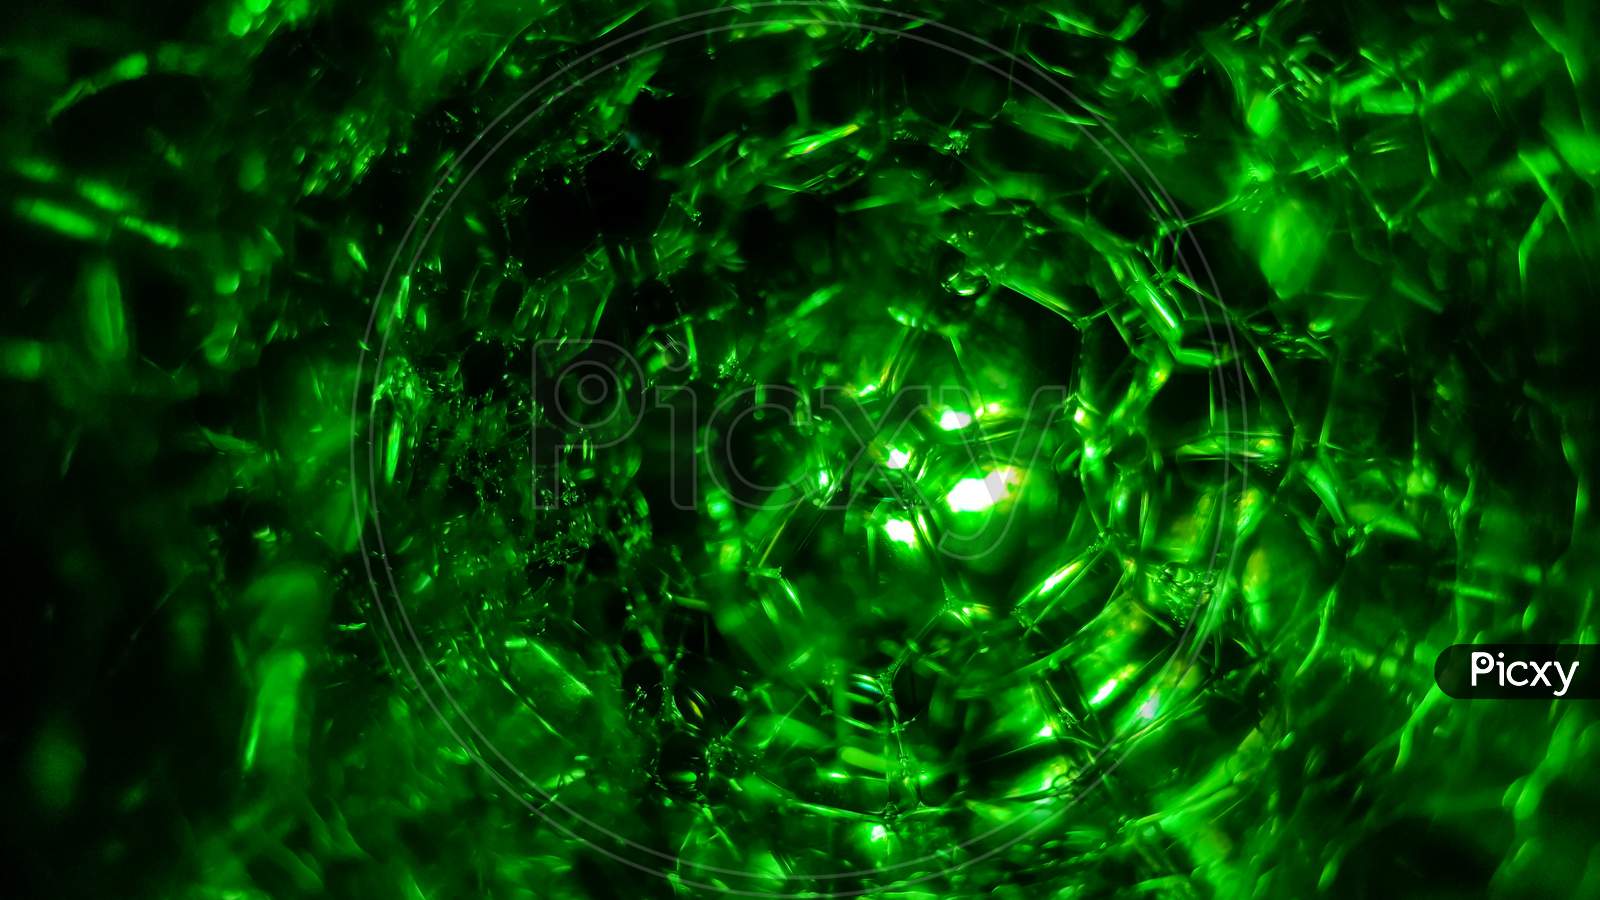 Abstract Of Green Soap Bubbles In Dark